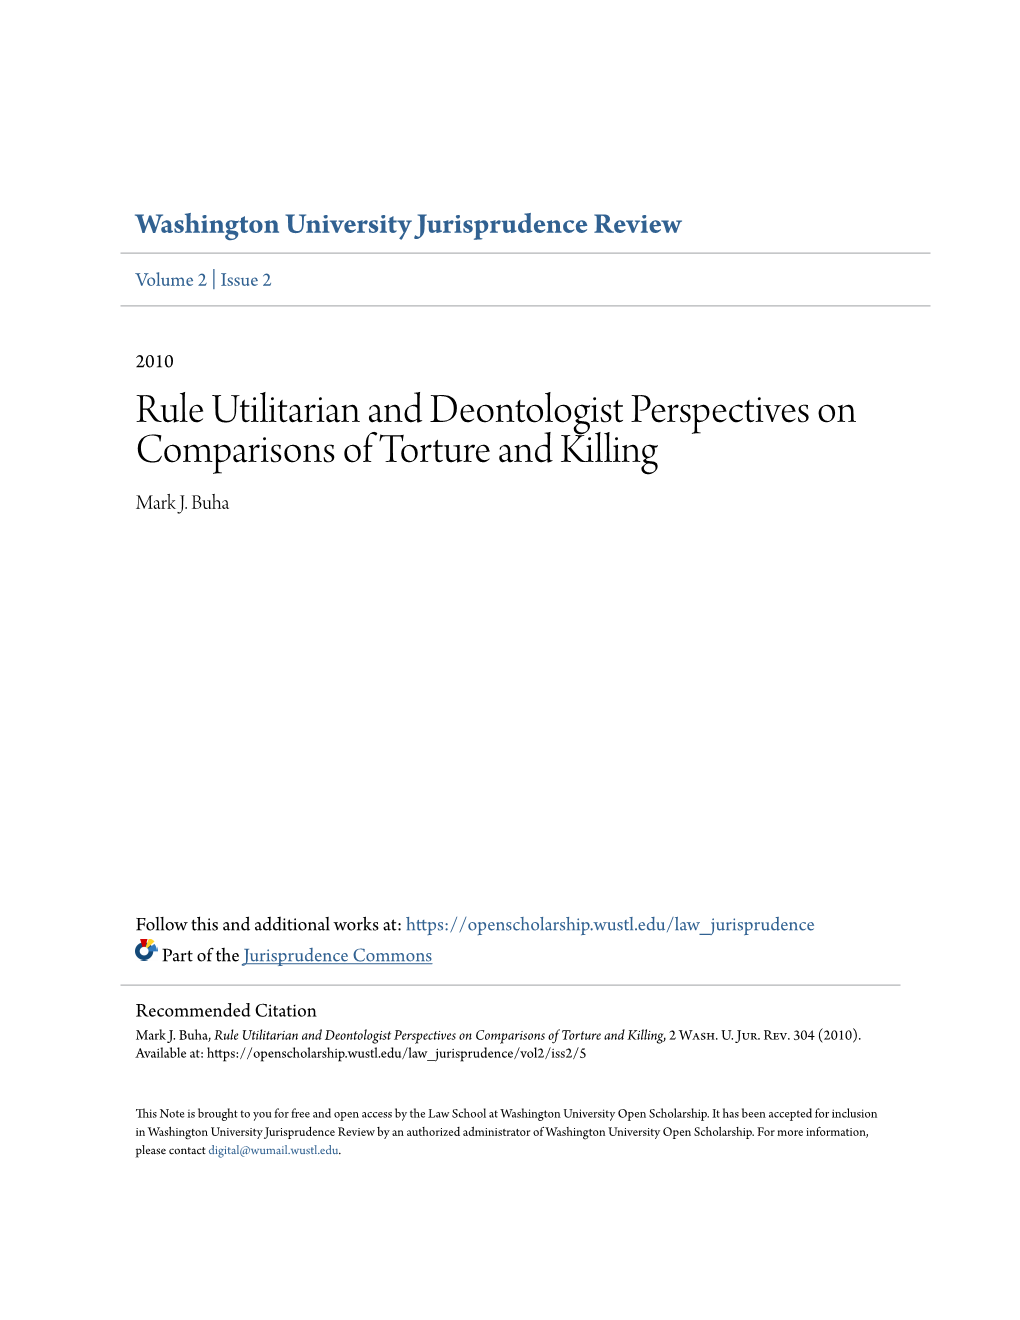 Rule Utilitarian and Deontologist Perspectives on Comparisons of Torture and Killing Mark J